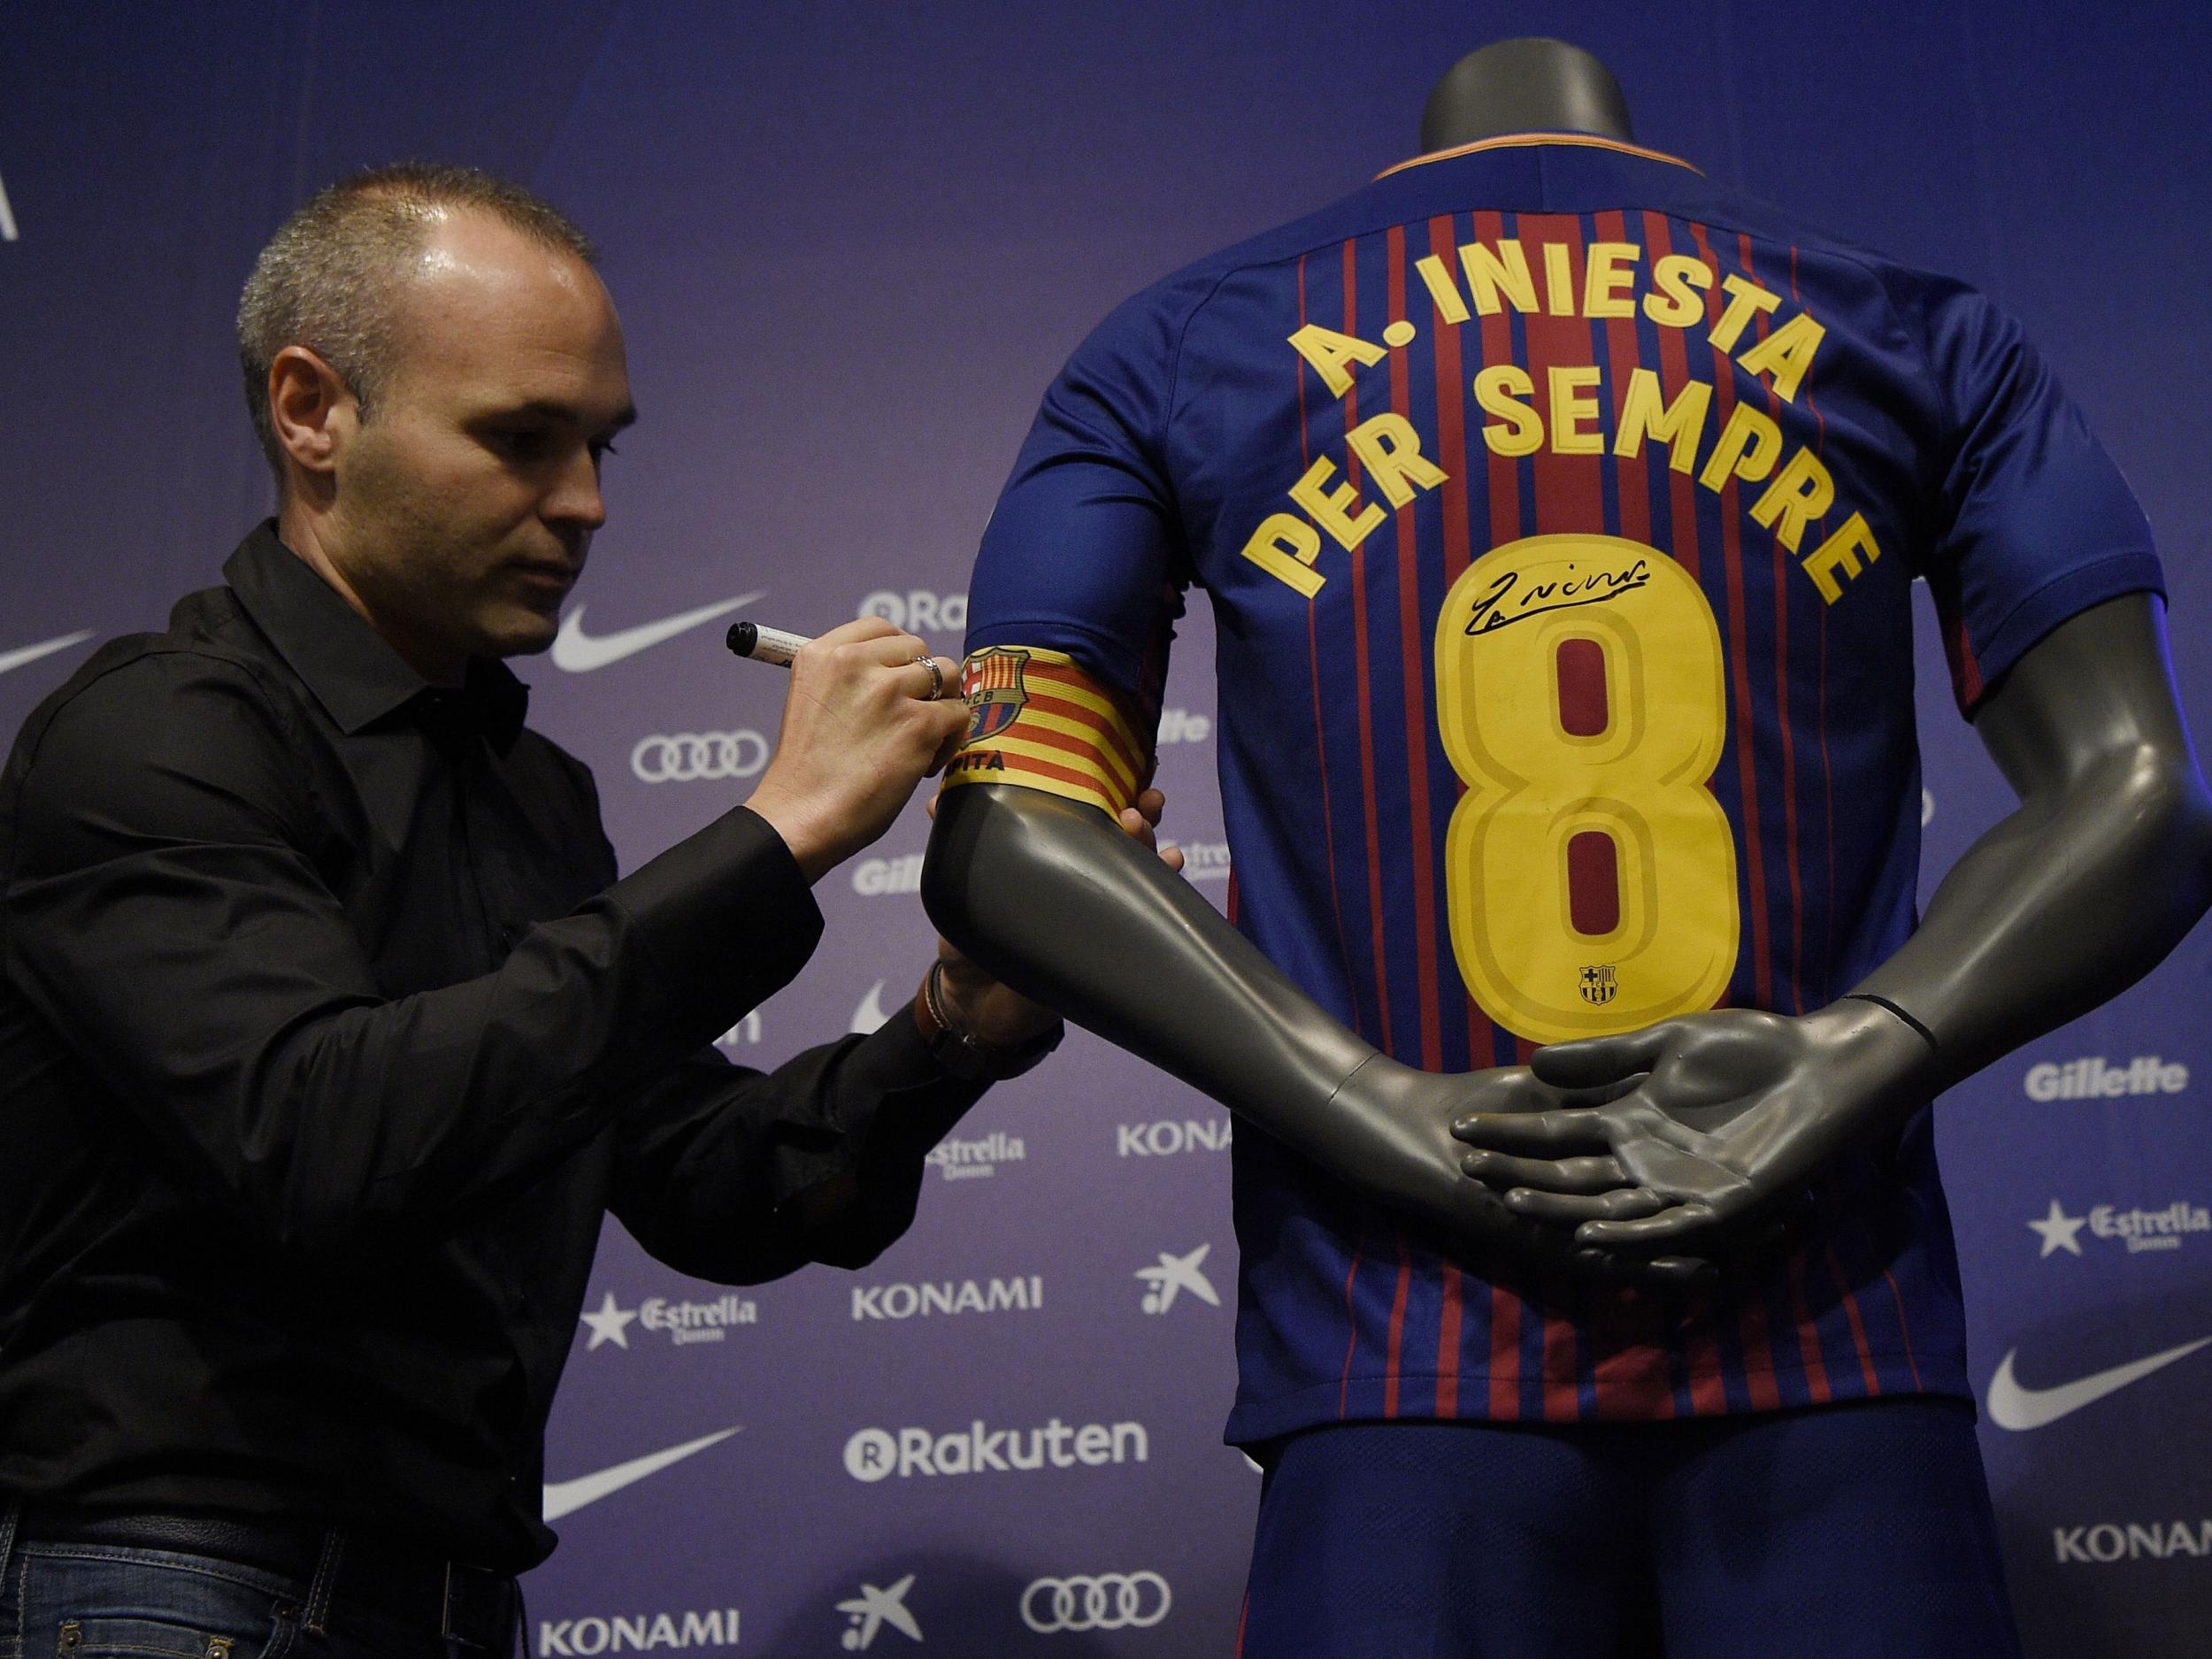 Andres Iniesta signs a shirt saying 'Iniesta forever'